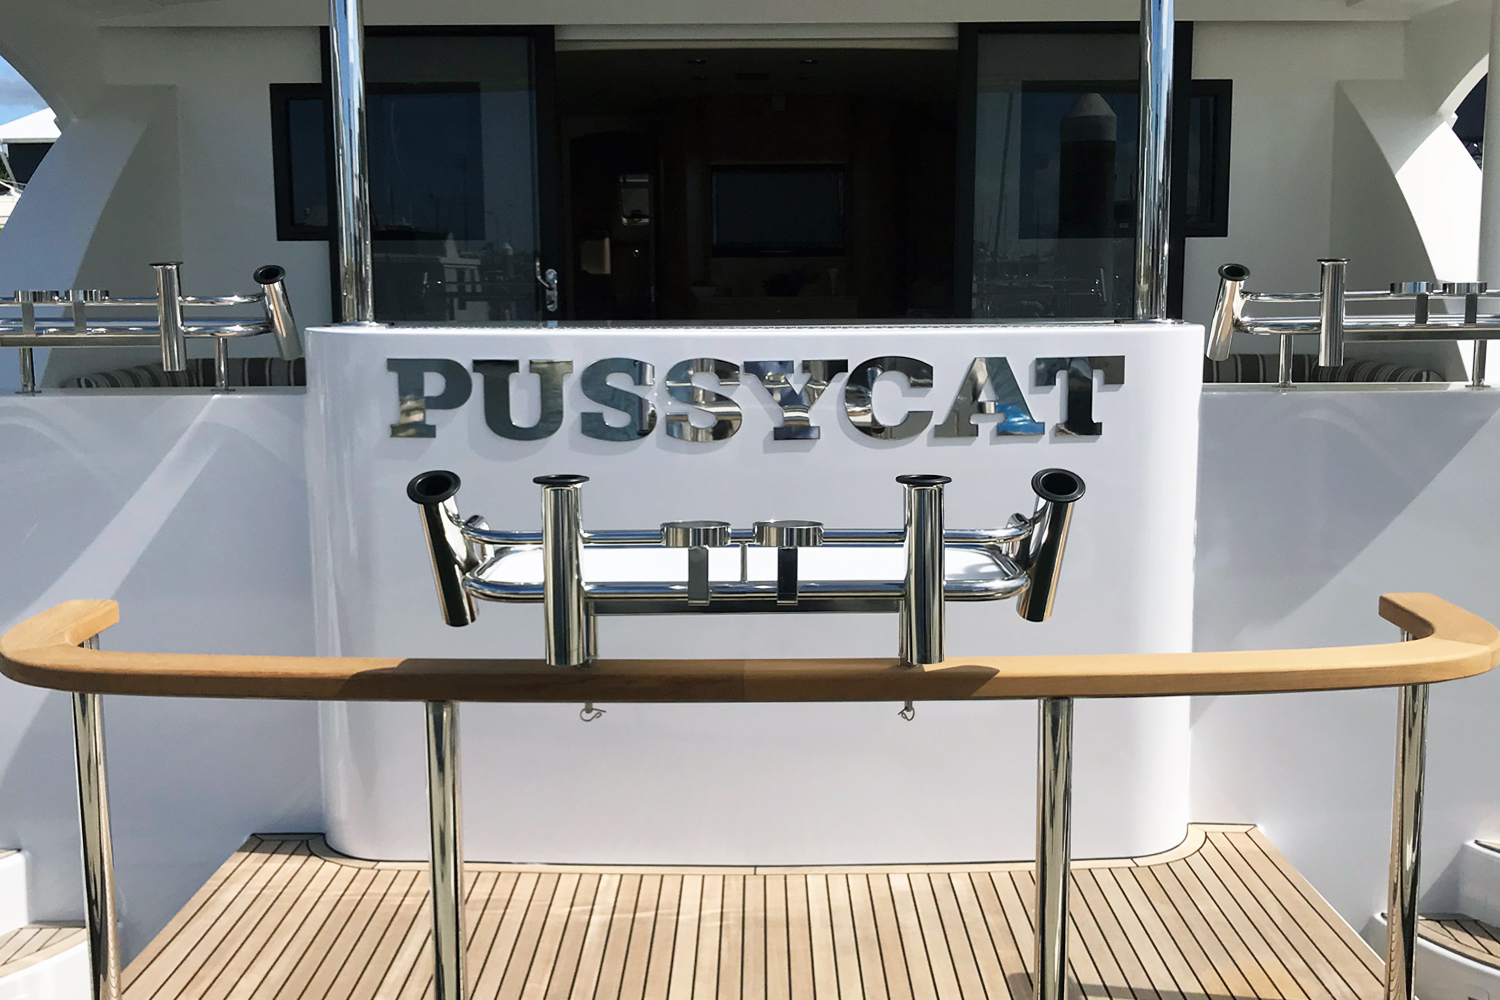 Stainless Boat Name-Pussycat